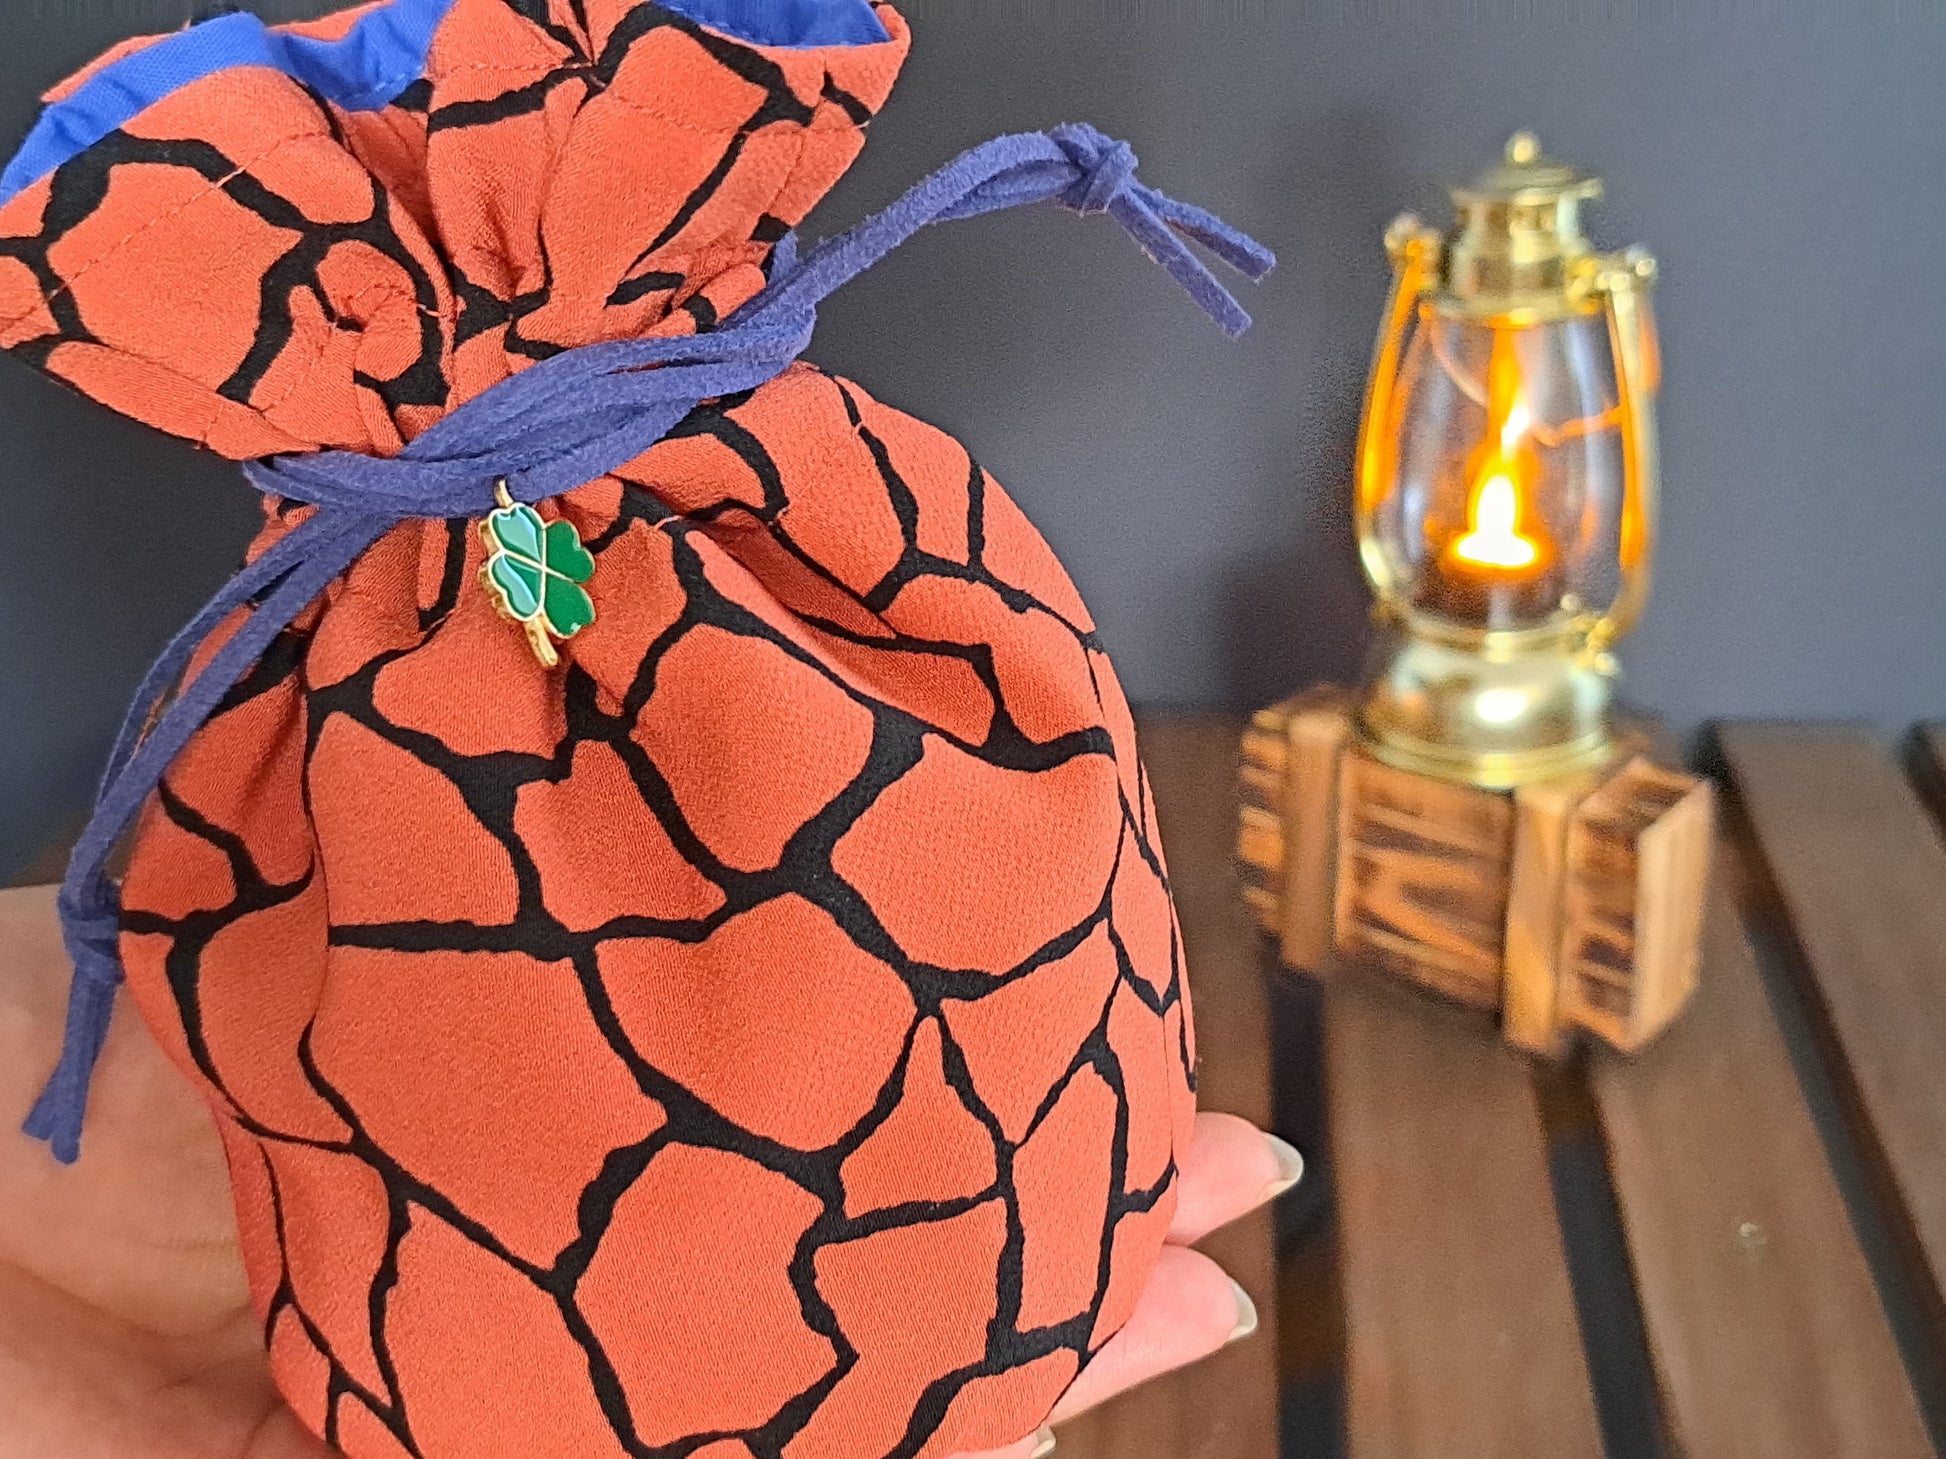 Zoomed in picture of Handmade Dice bag made of orange fabric with black cracks in it